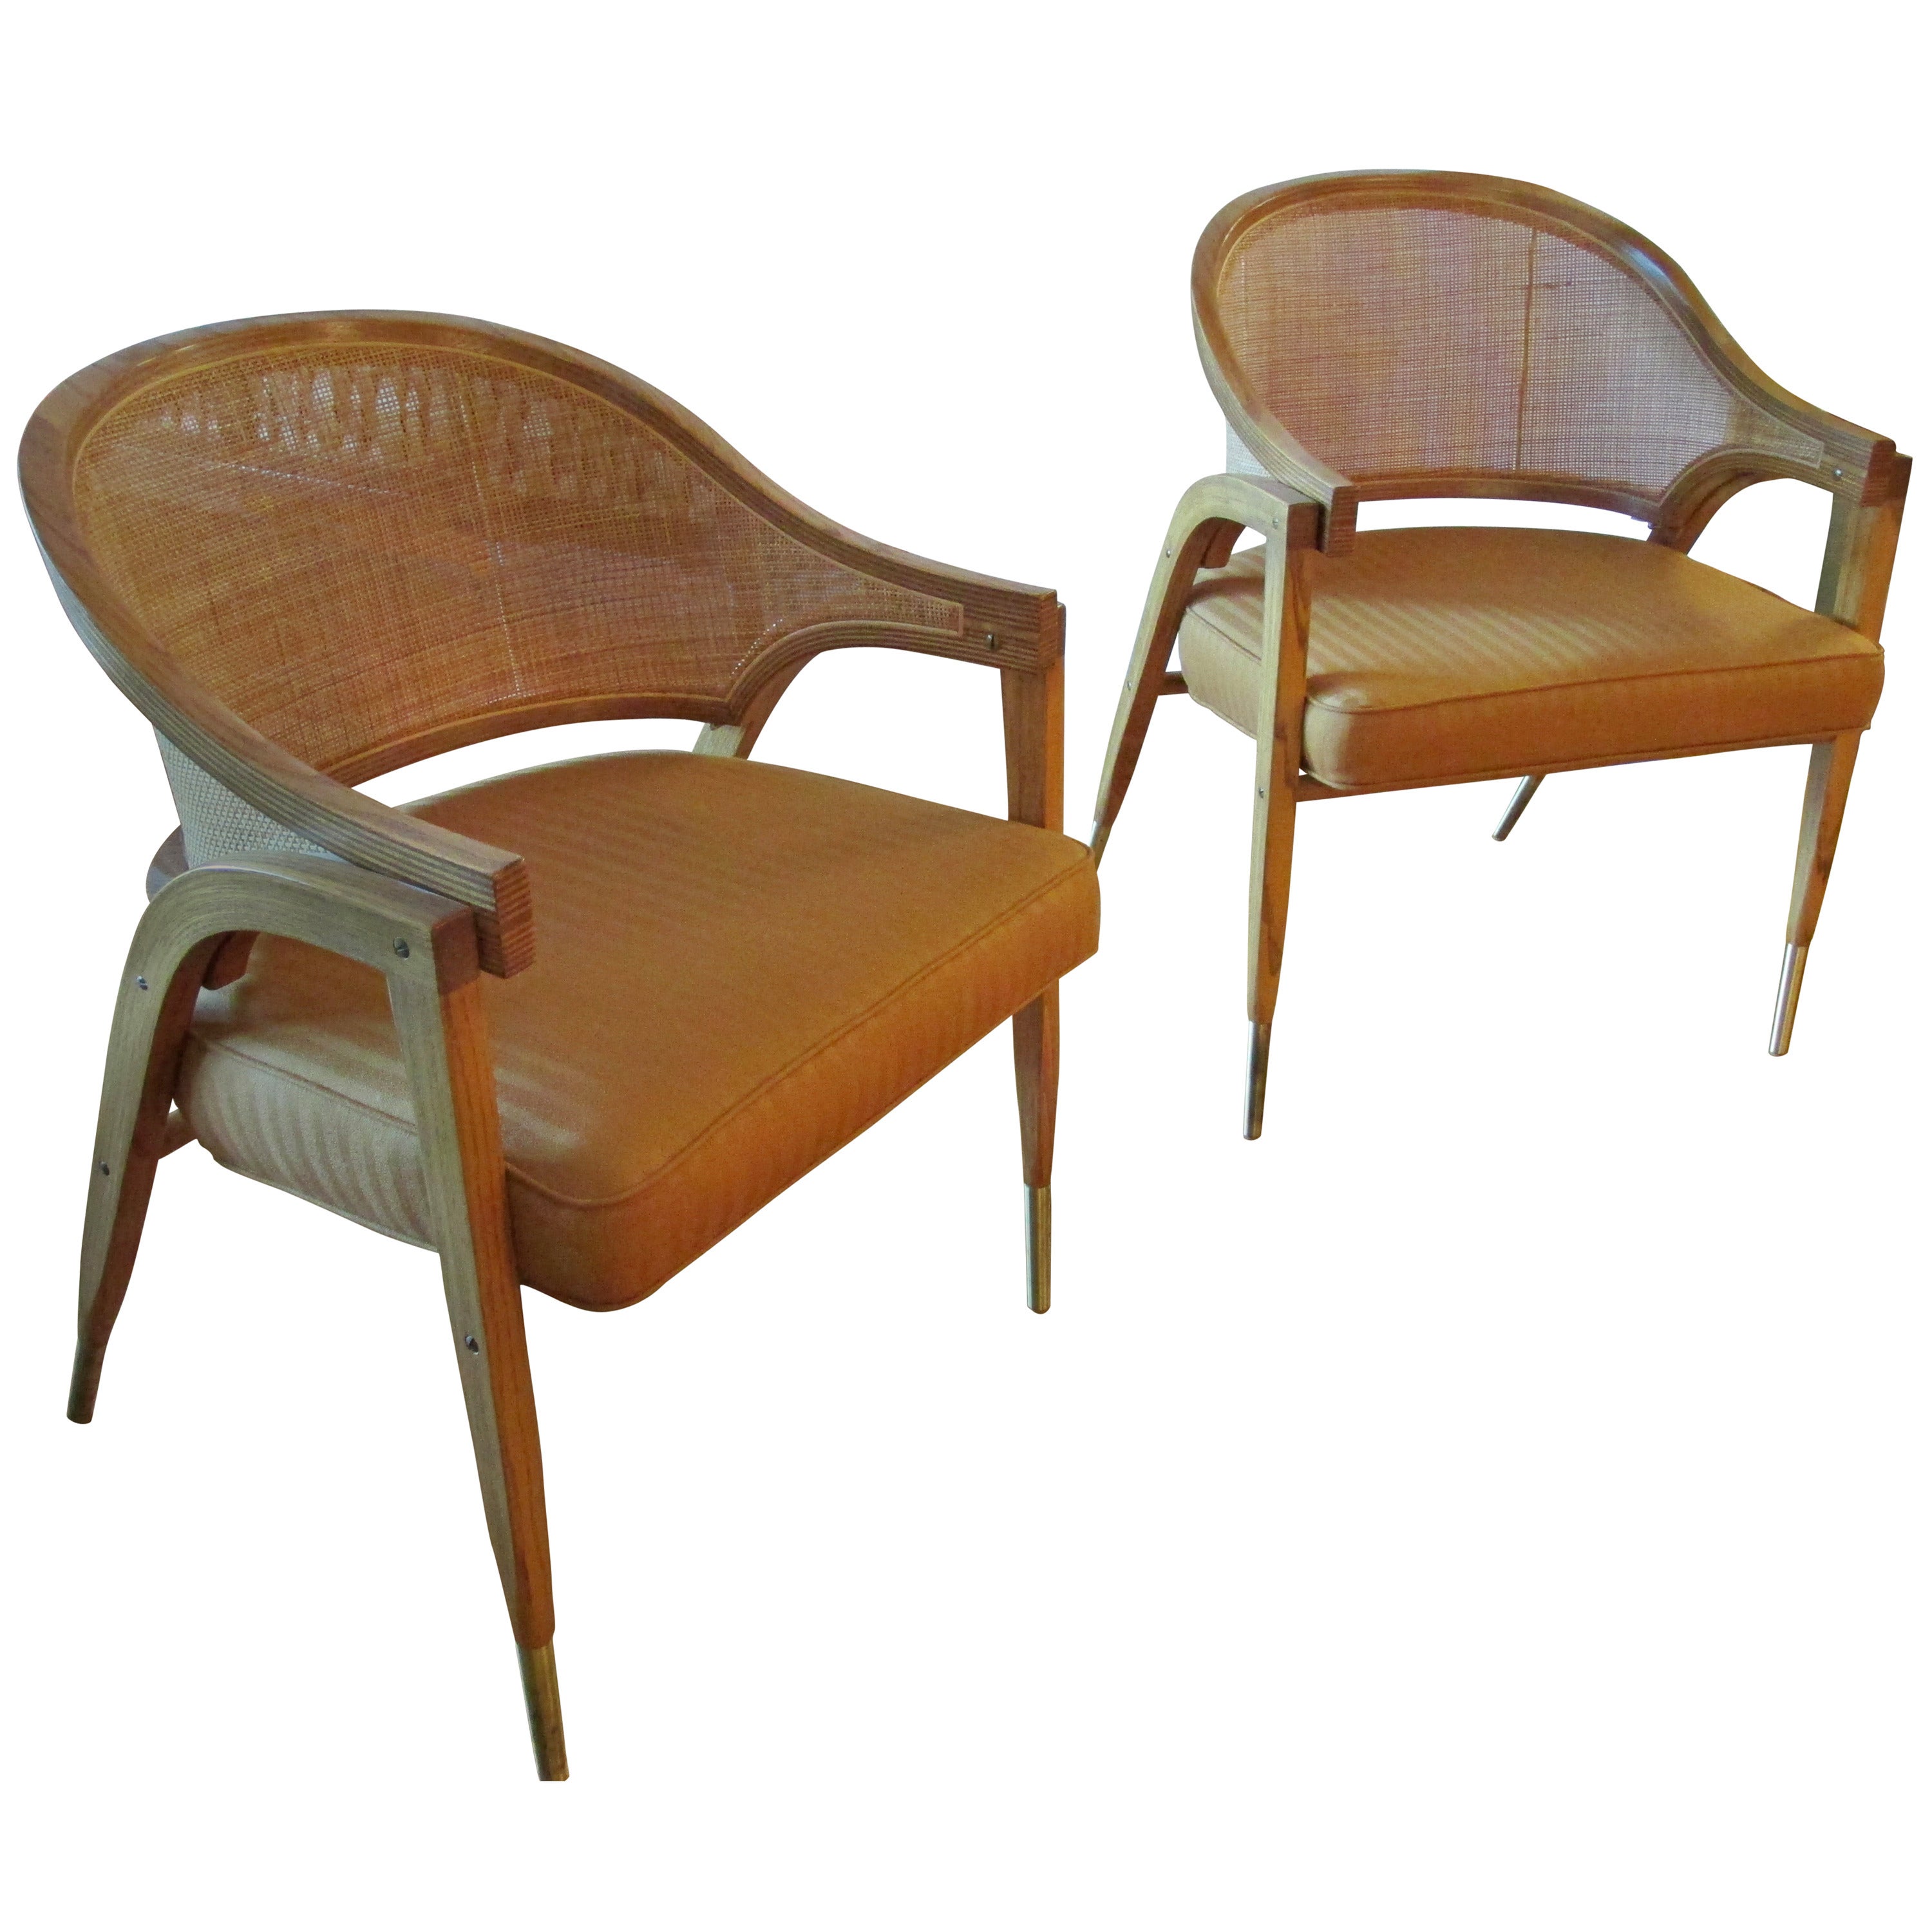 Pair of Armchairs by Edward Wormley for Dunbar